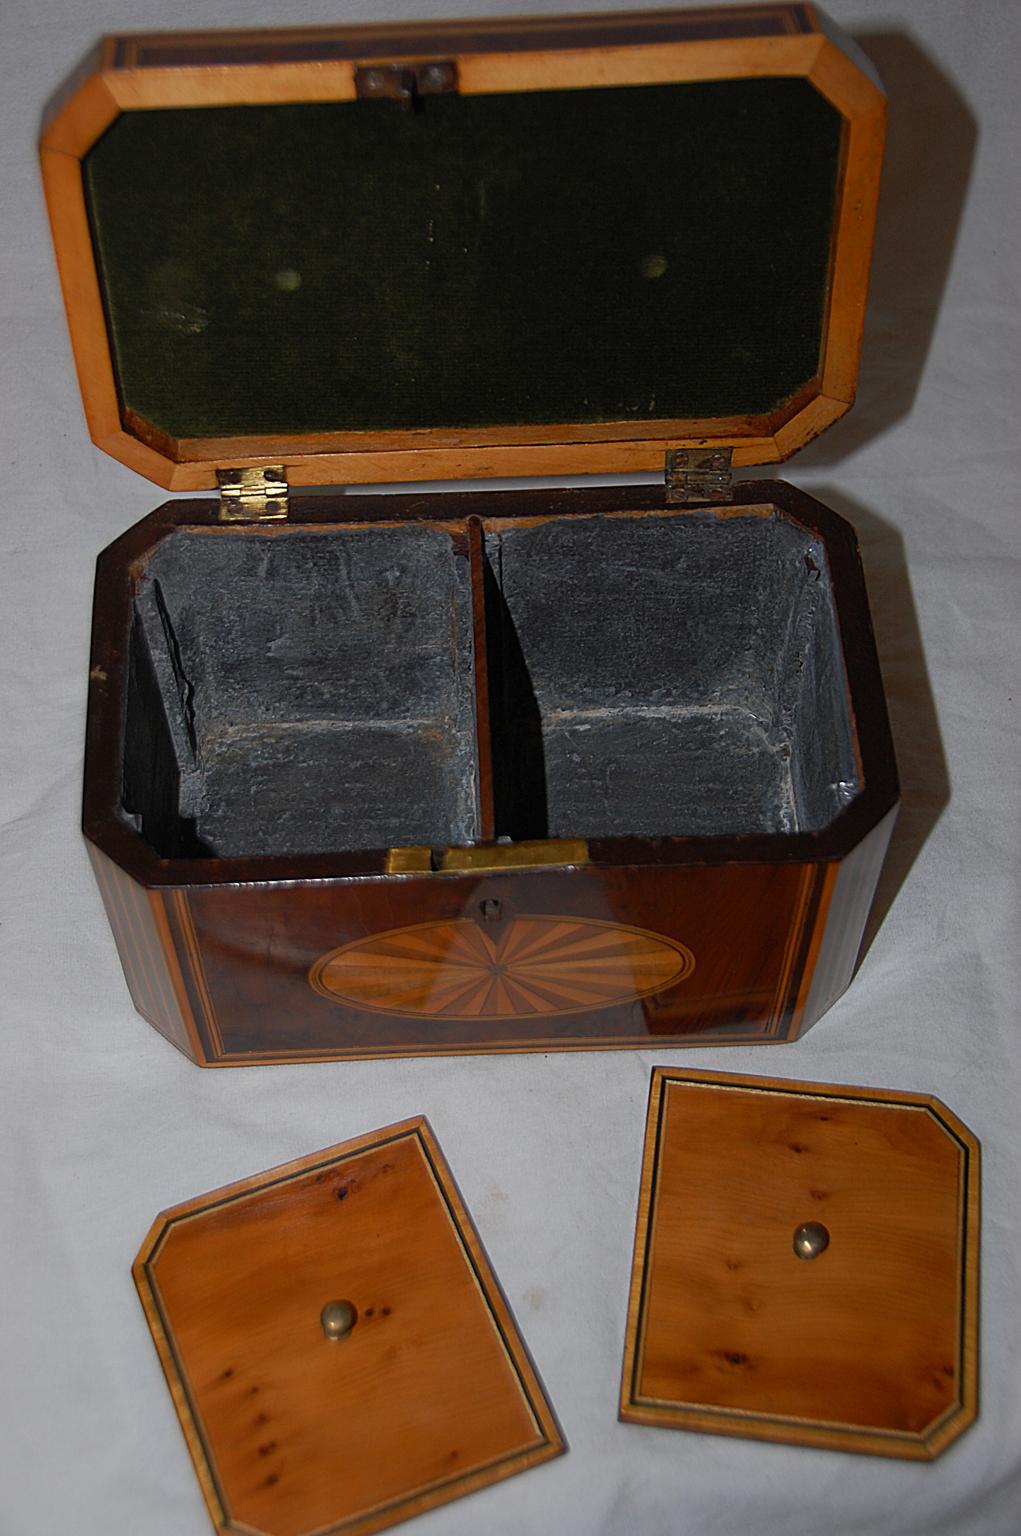 English Georgian Period Yew Wood Octagonal Tea Caddy with Fan and Column Inlays In Good Condition For Sale In Wells, ME